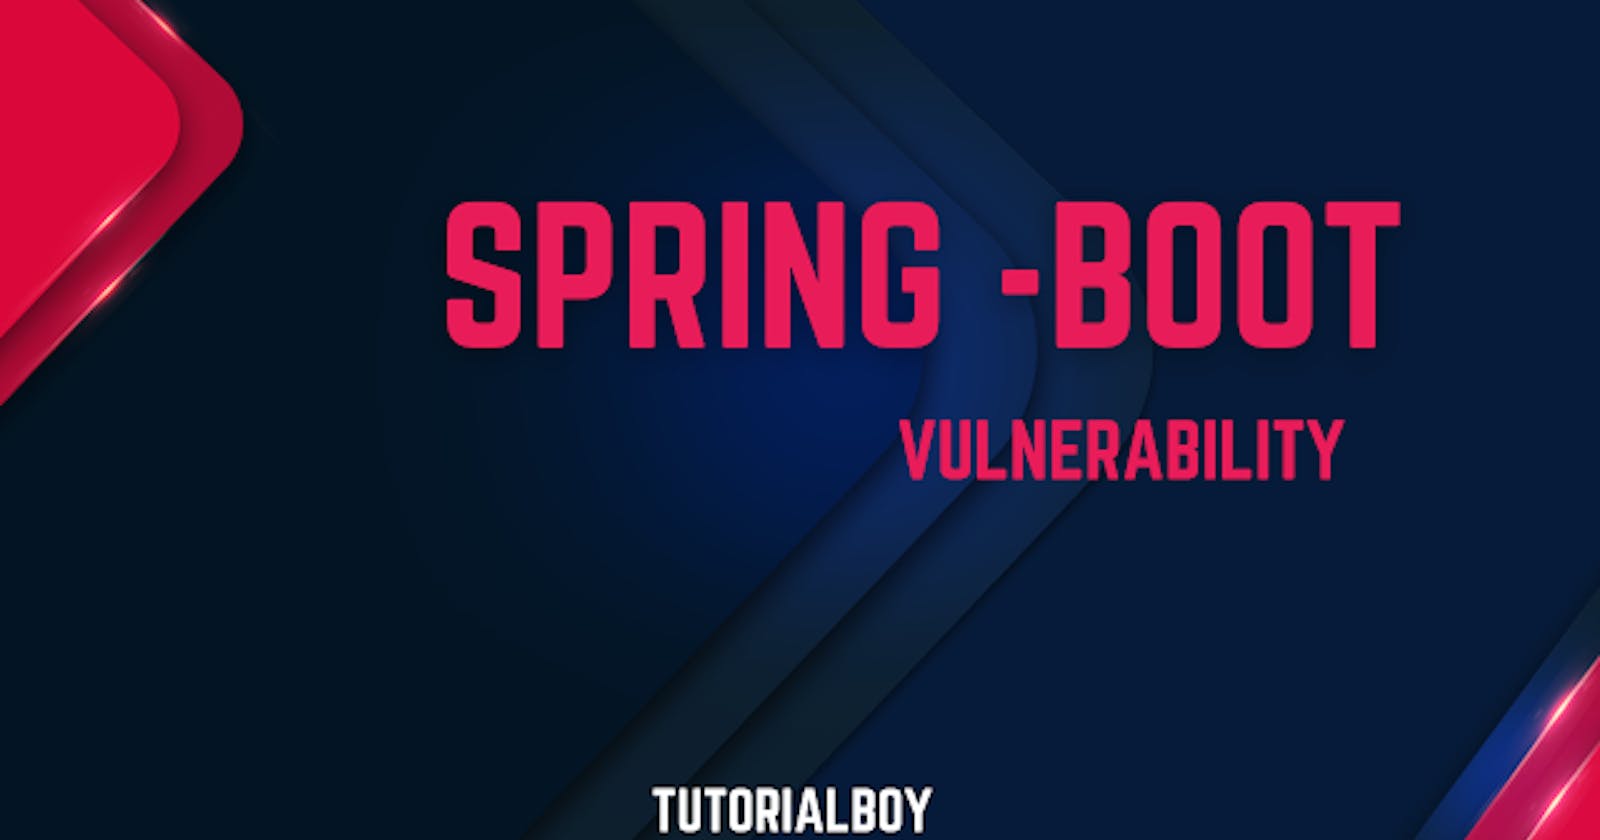 Introduction to Spring Boot Related Vulnerabilities